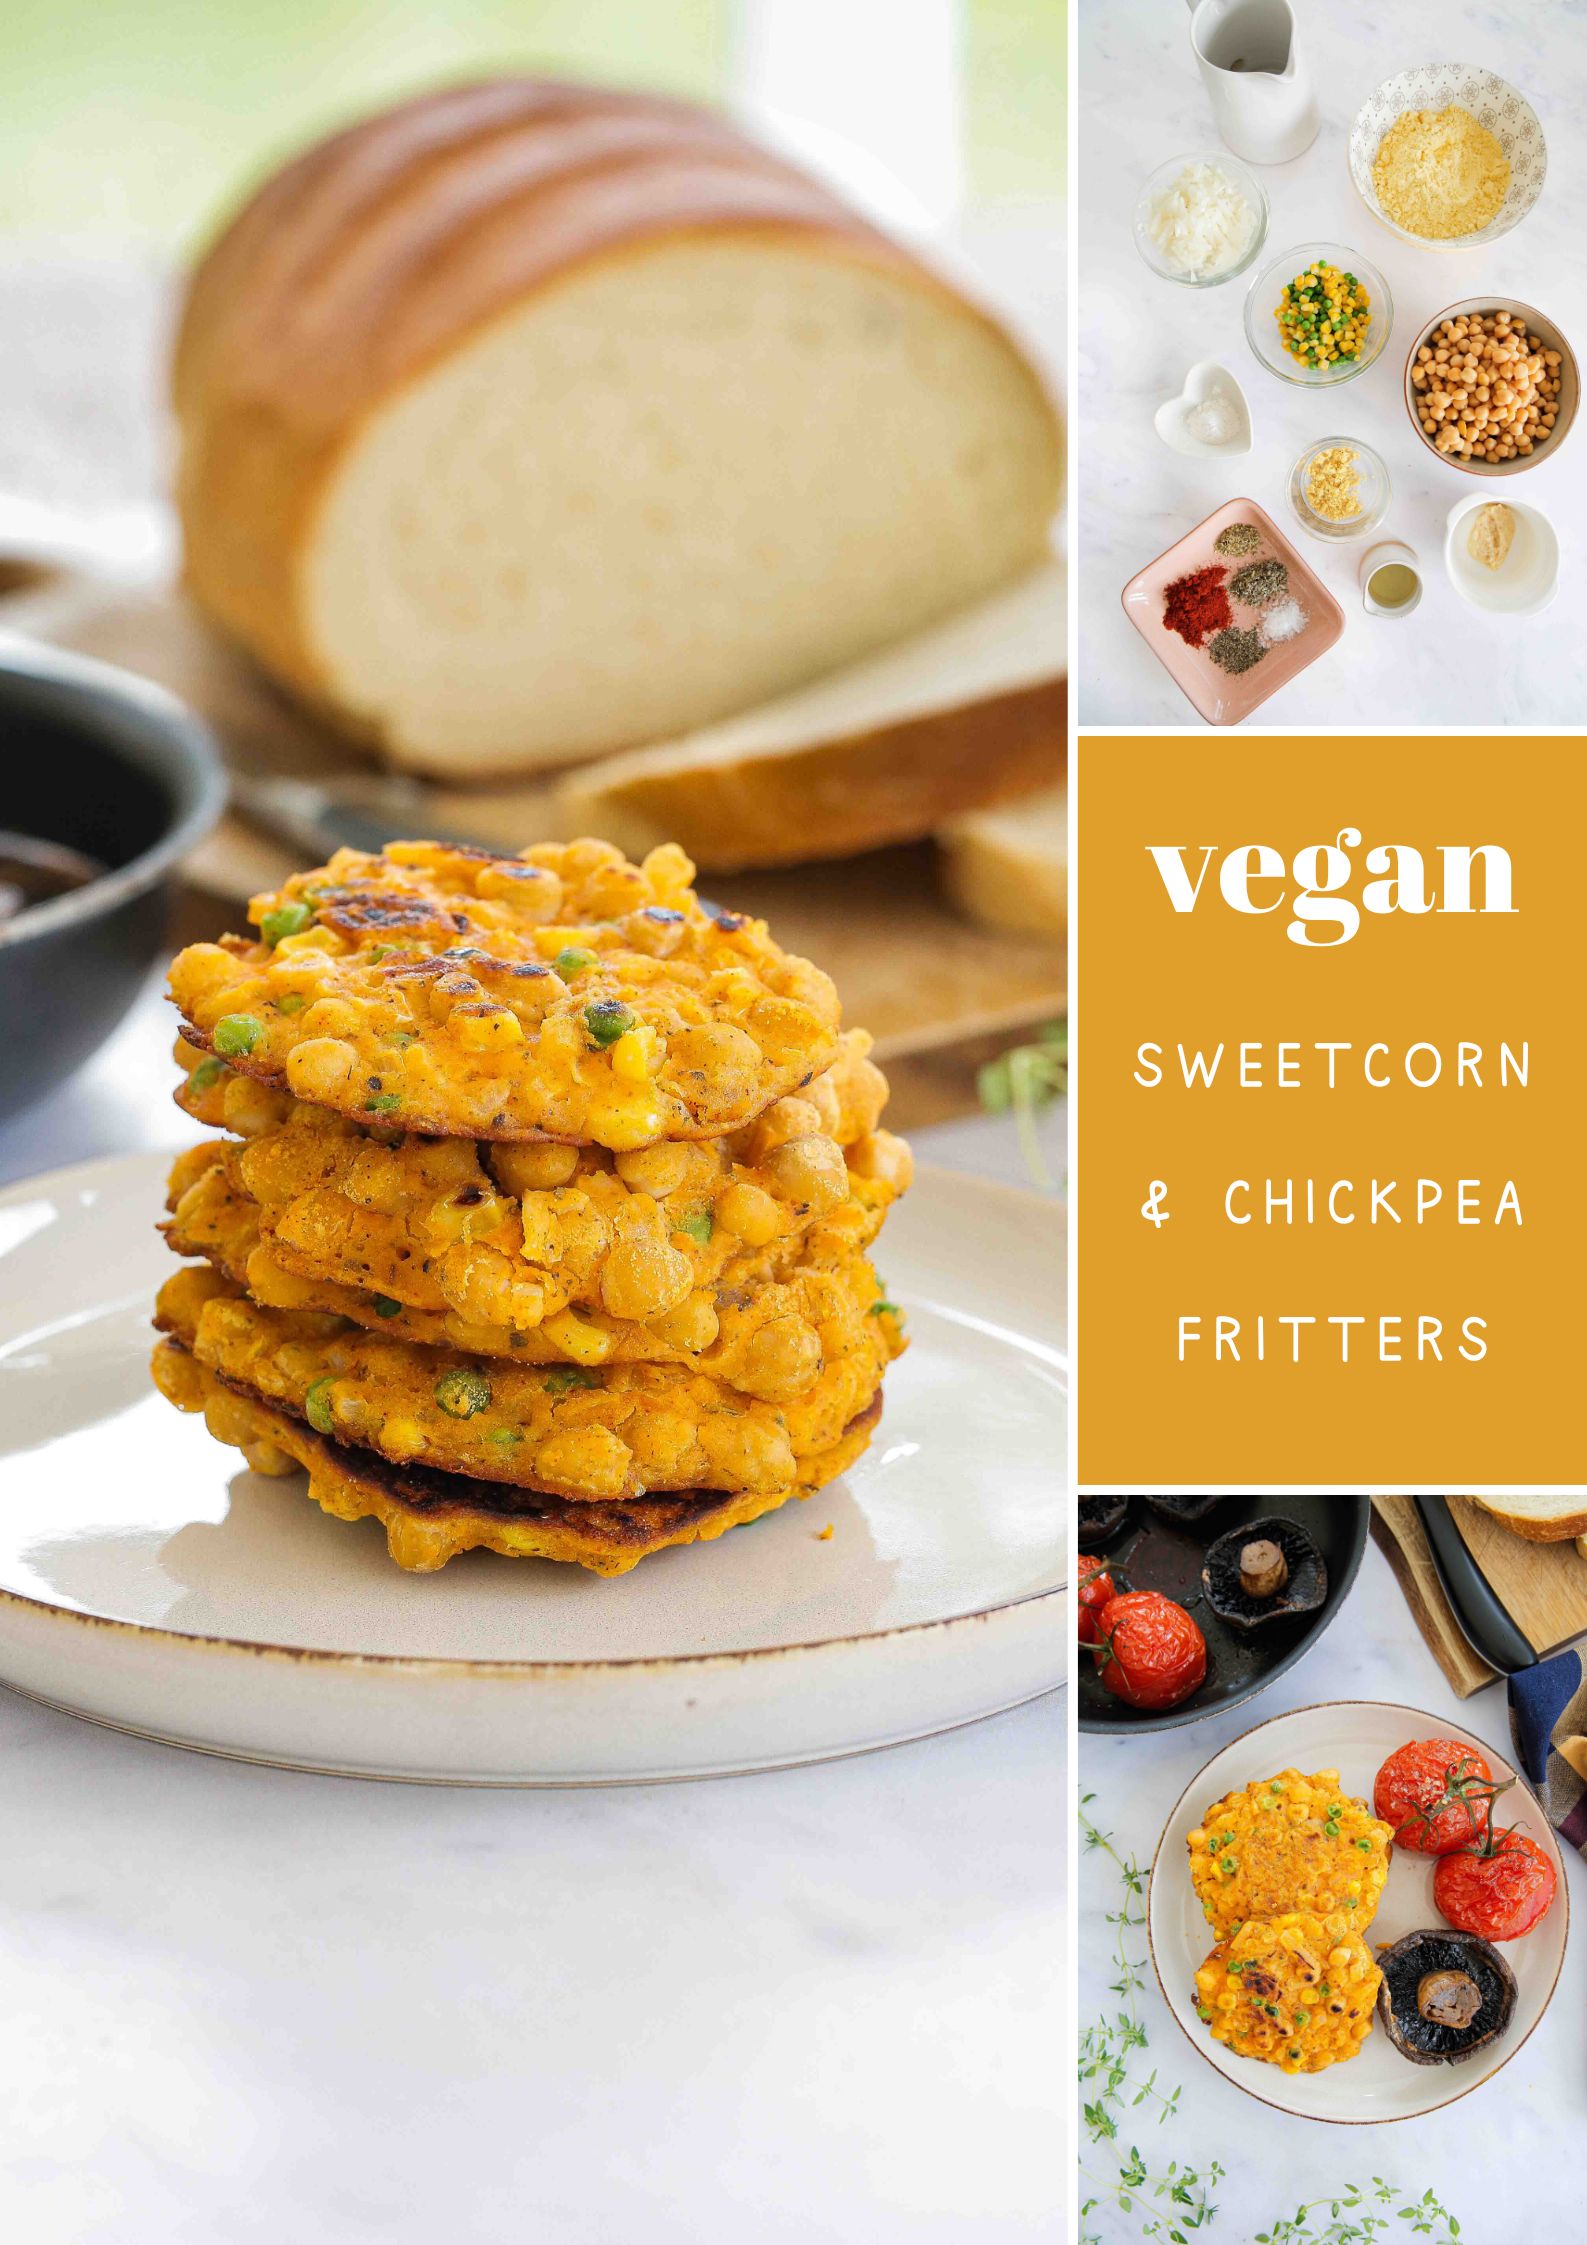 Super simple and healthy sweetcorn fritters, packed with flavour and vegan protein! Just one bowl and one frying pan needed for a delicious lunch, brunch or side dish. Gluten free too! Recipe on thecookandhim.com #vegan #summerrecipes #healthydinner #summermeals #glutenfreerecipes #sweetcornfritters